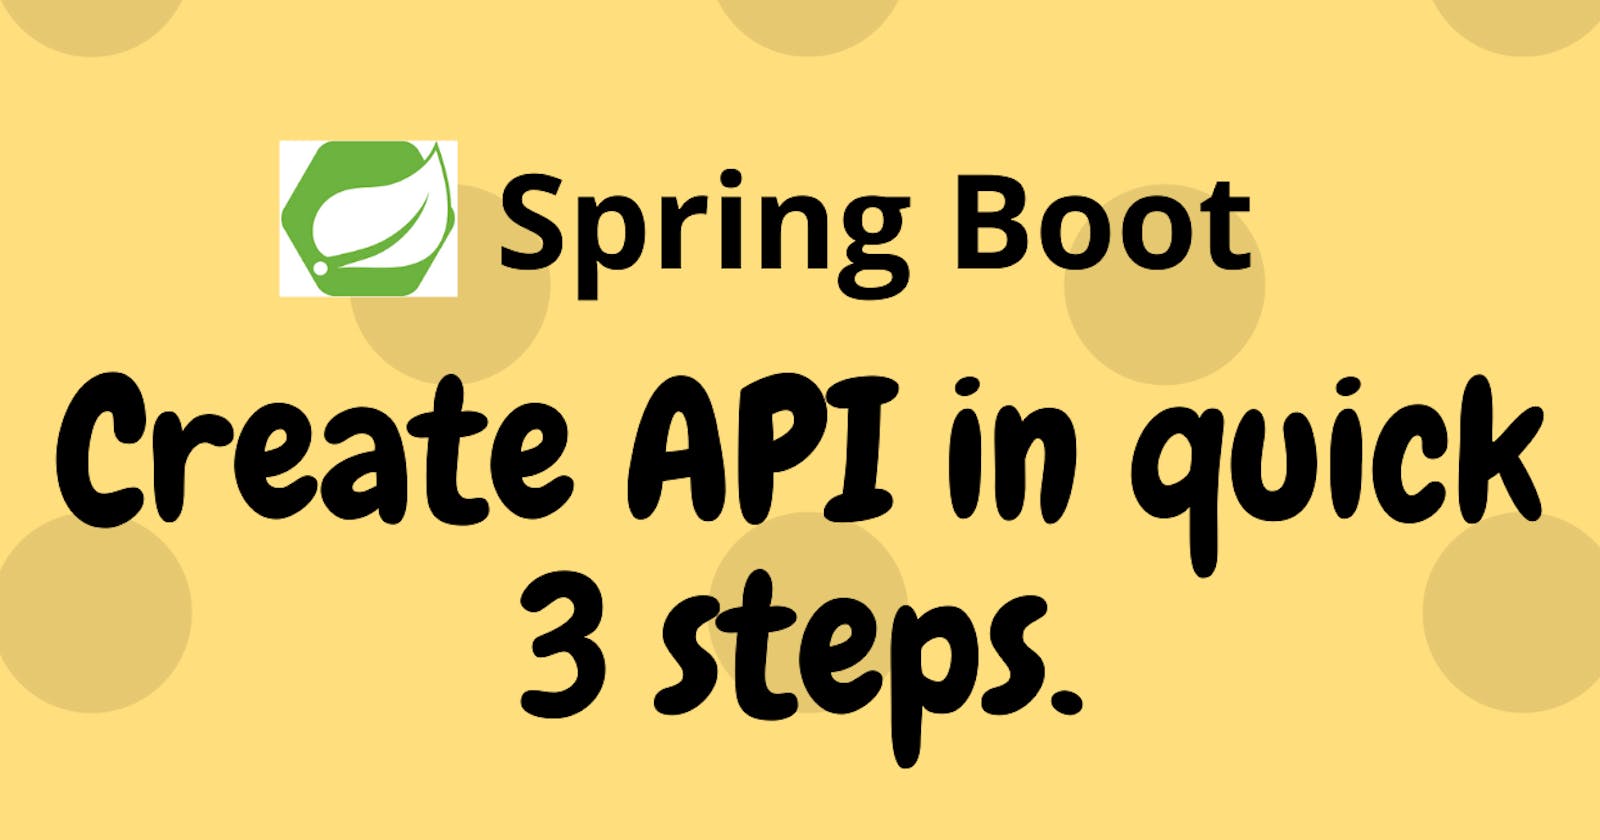 Quick walkthrough of creating an API with Spring Boot.